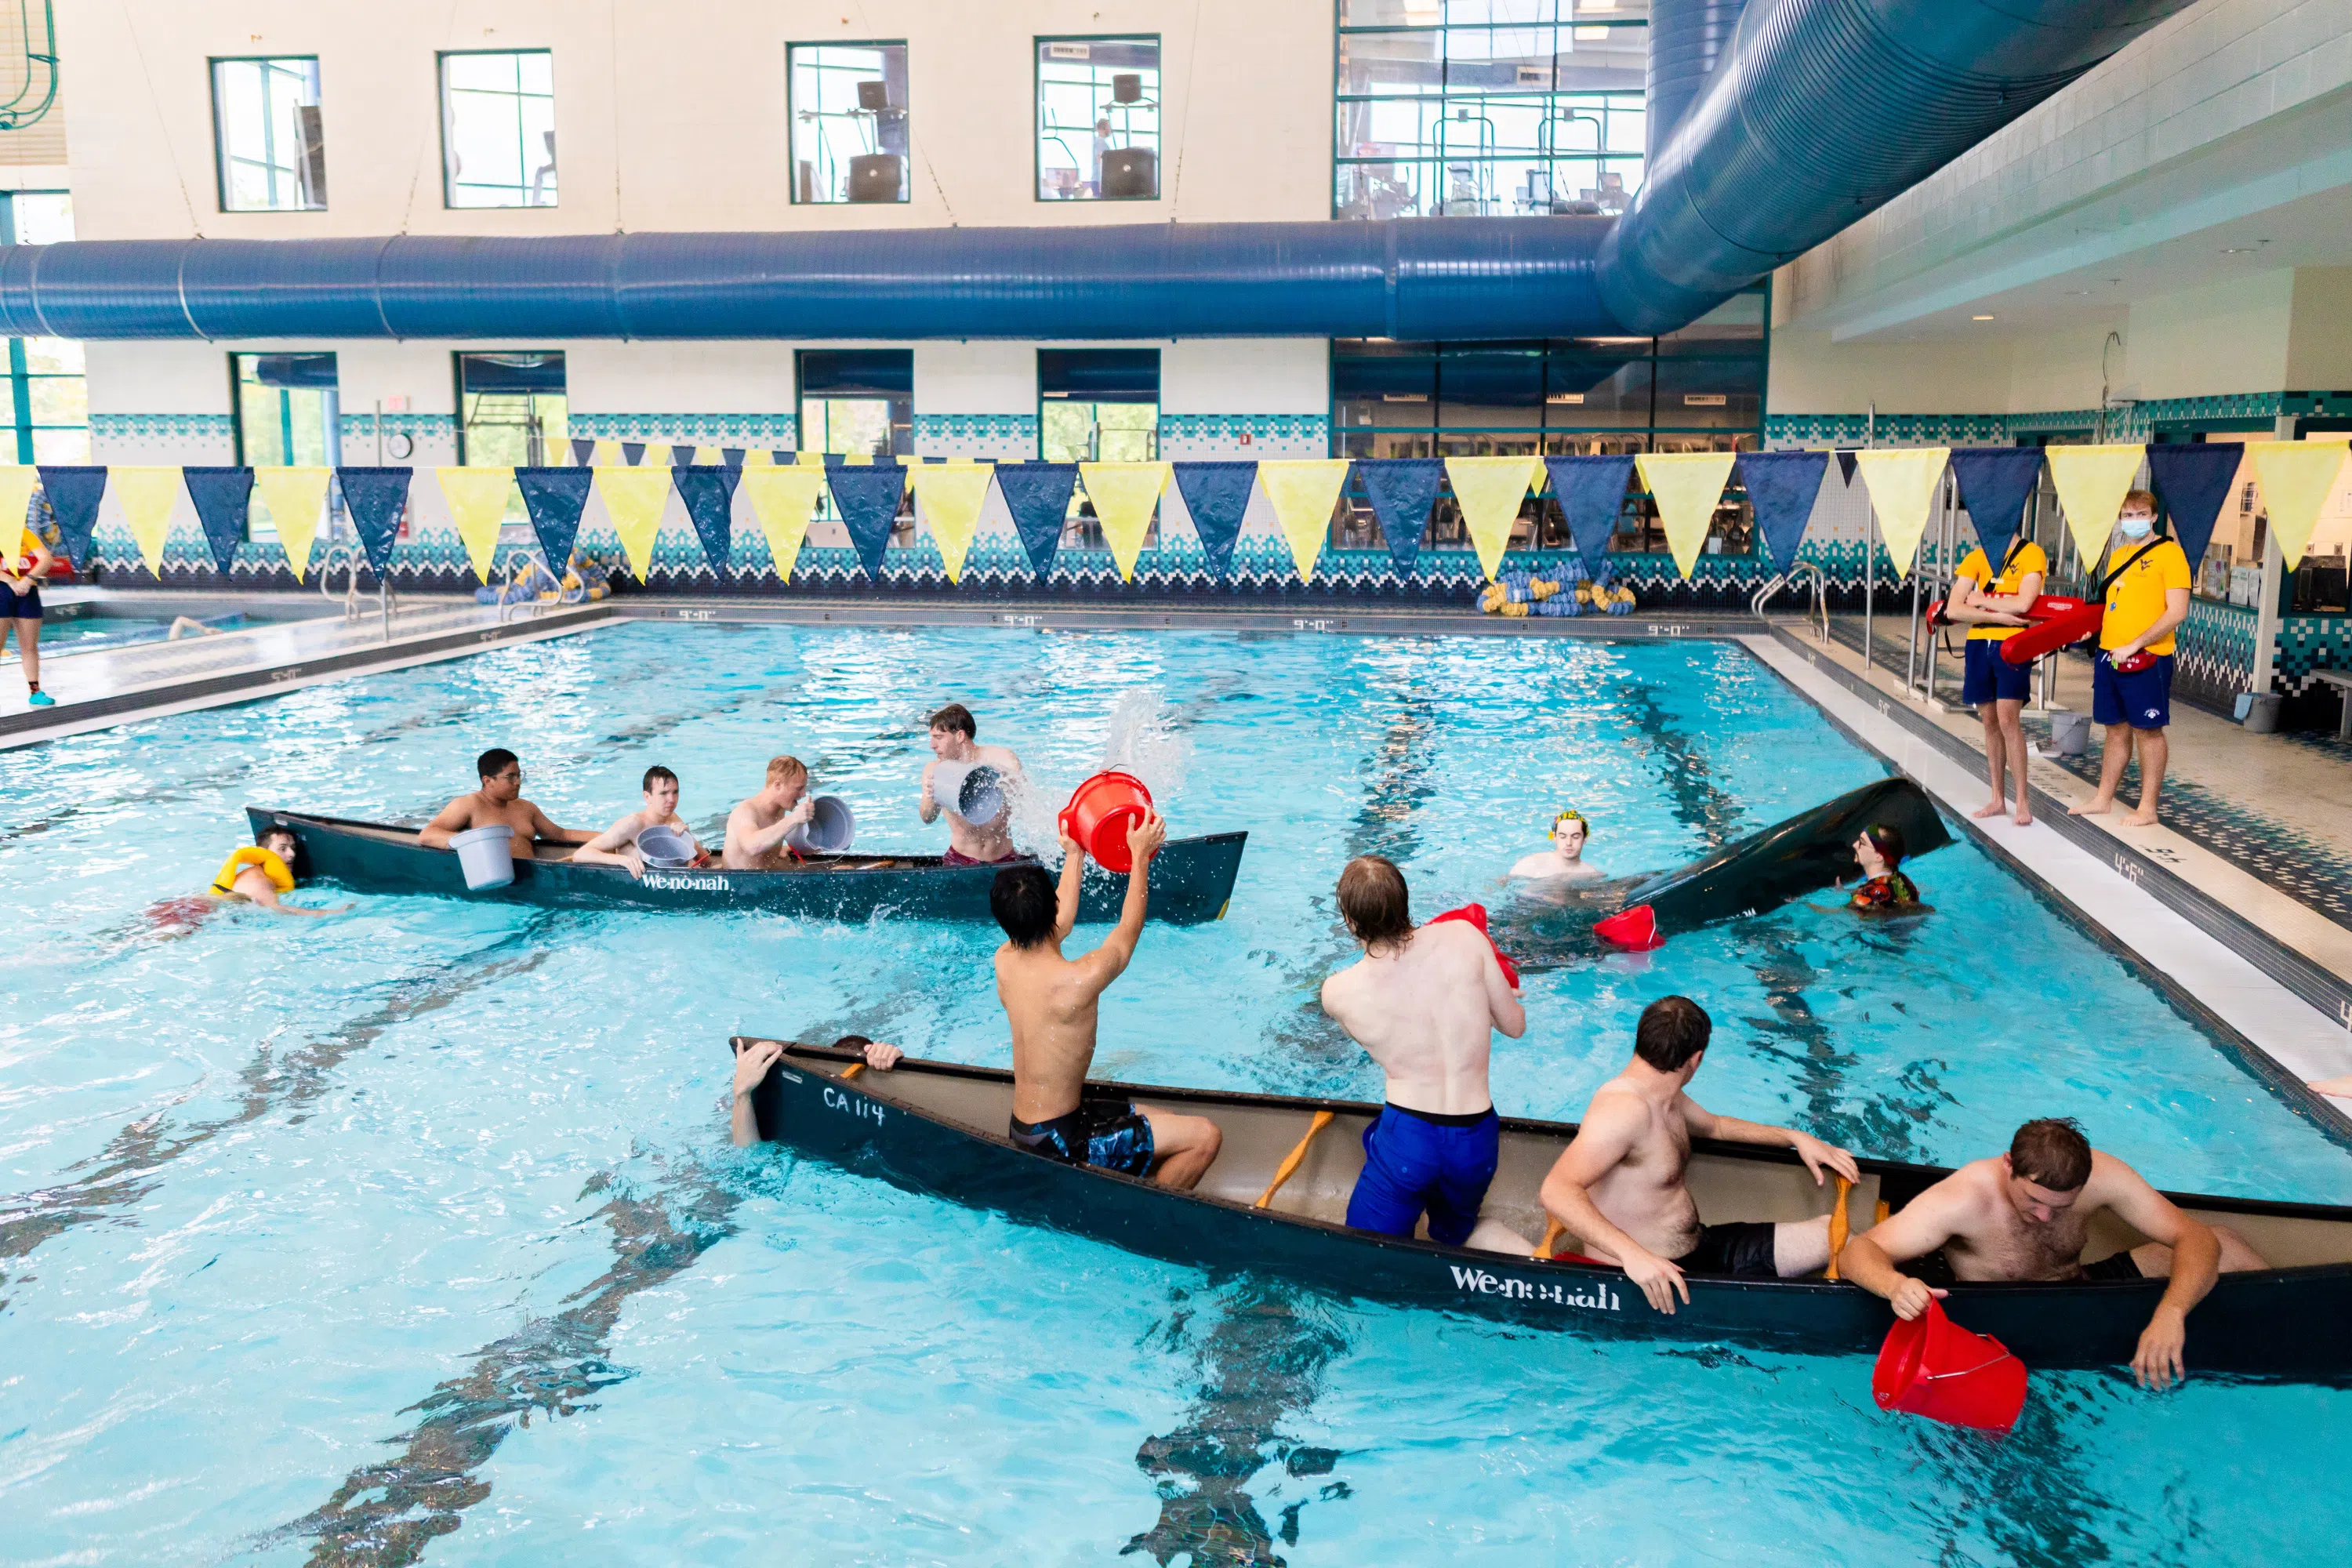 Students in two canoes within the olympic style-lap swimming pool playing canoe battleship. 